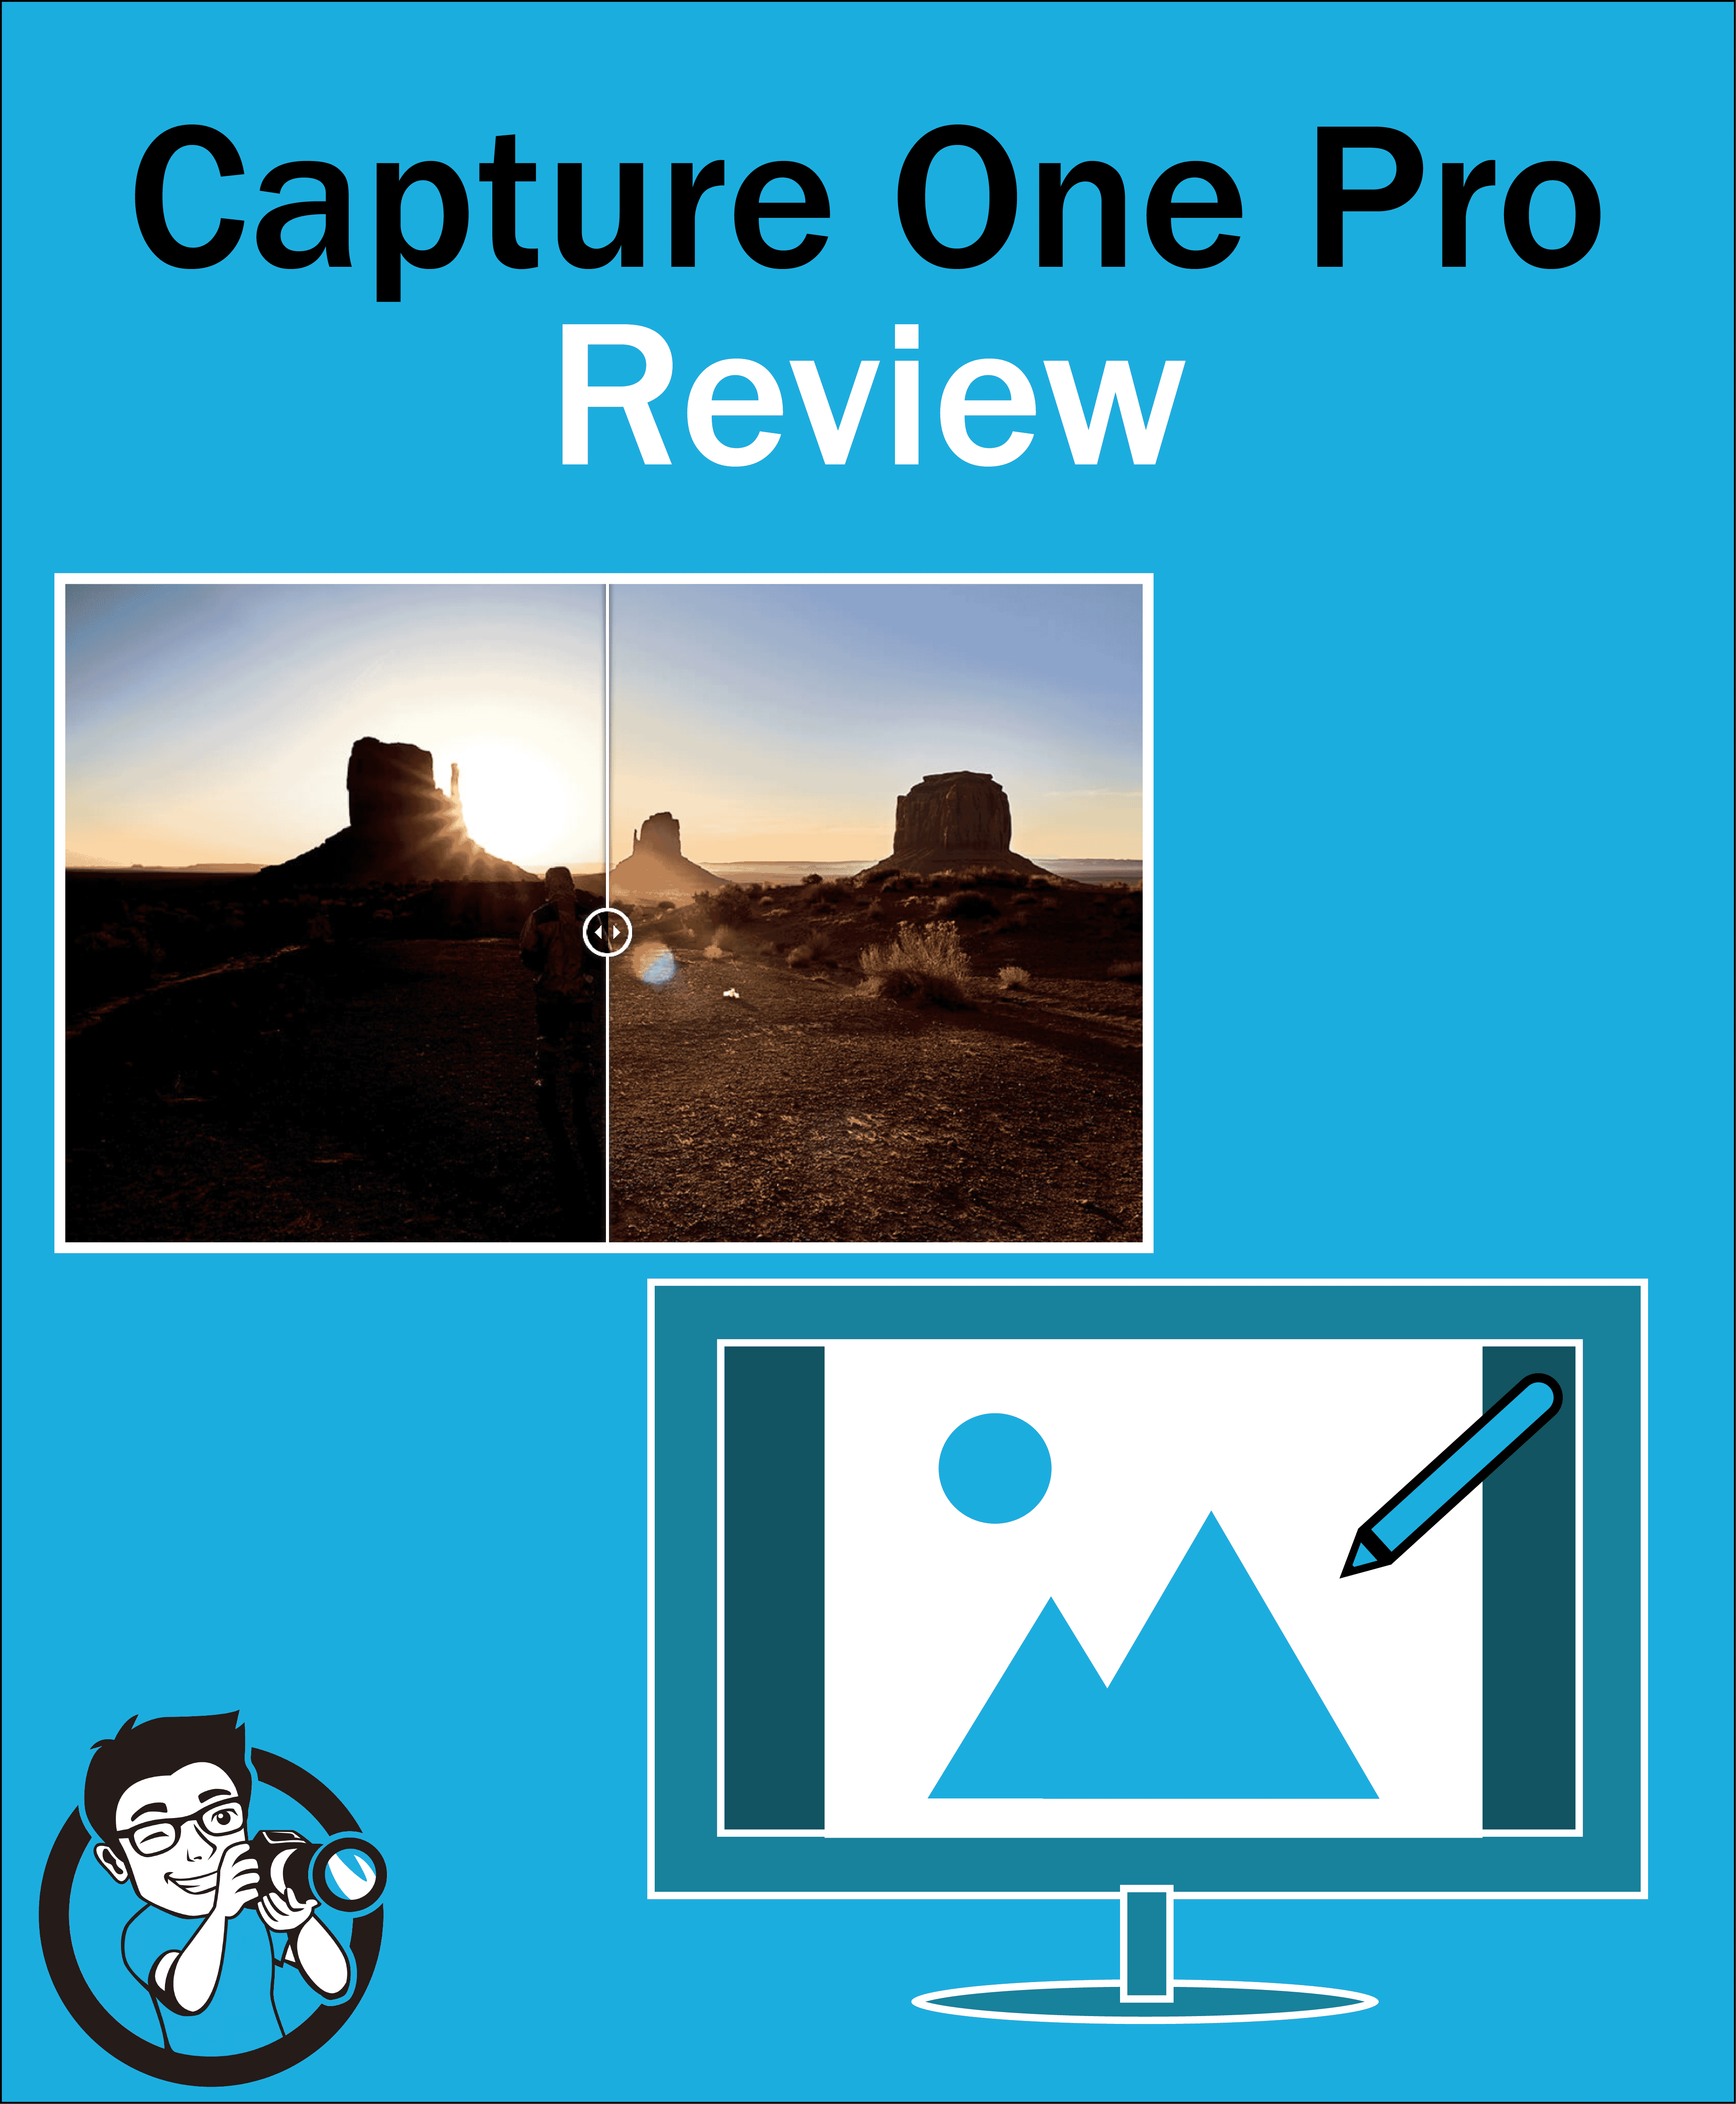 Capture One 23 Pro 16.2.2.1406 download the new version for windows